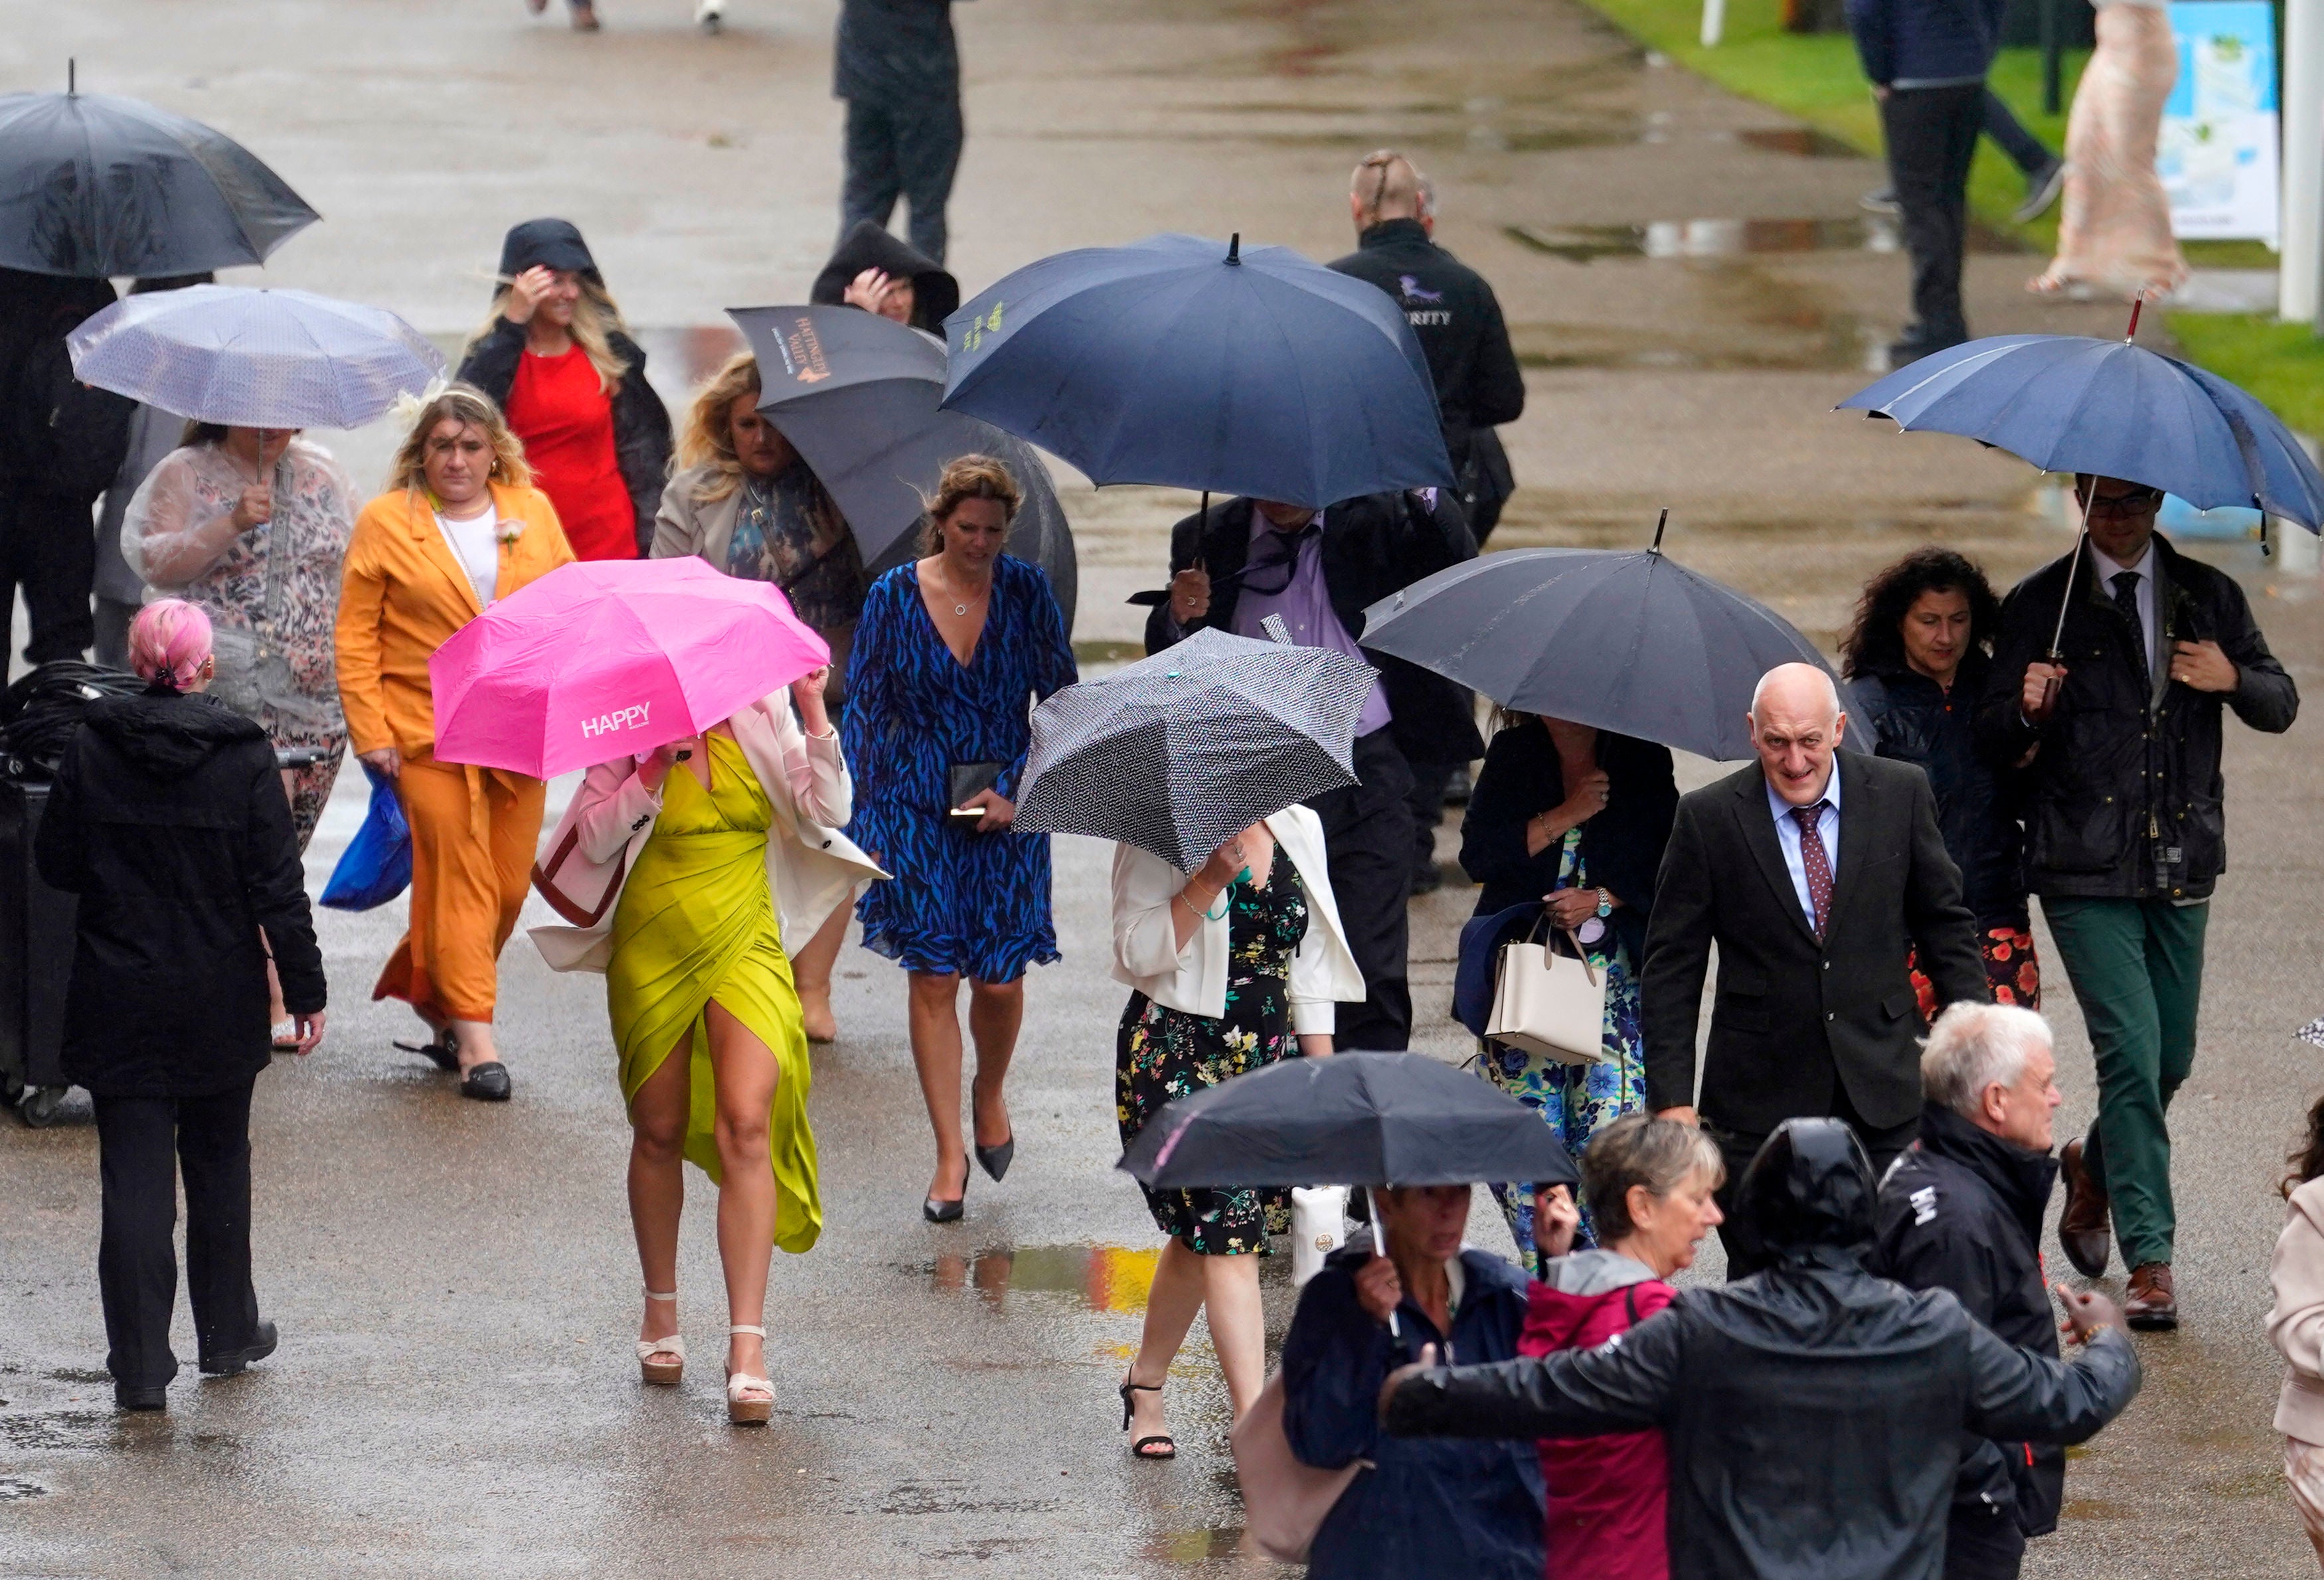 Racegoers shelter from the rain as they arrive for day five of the Qatar Goodwood Festival at Goodwood Racecourse